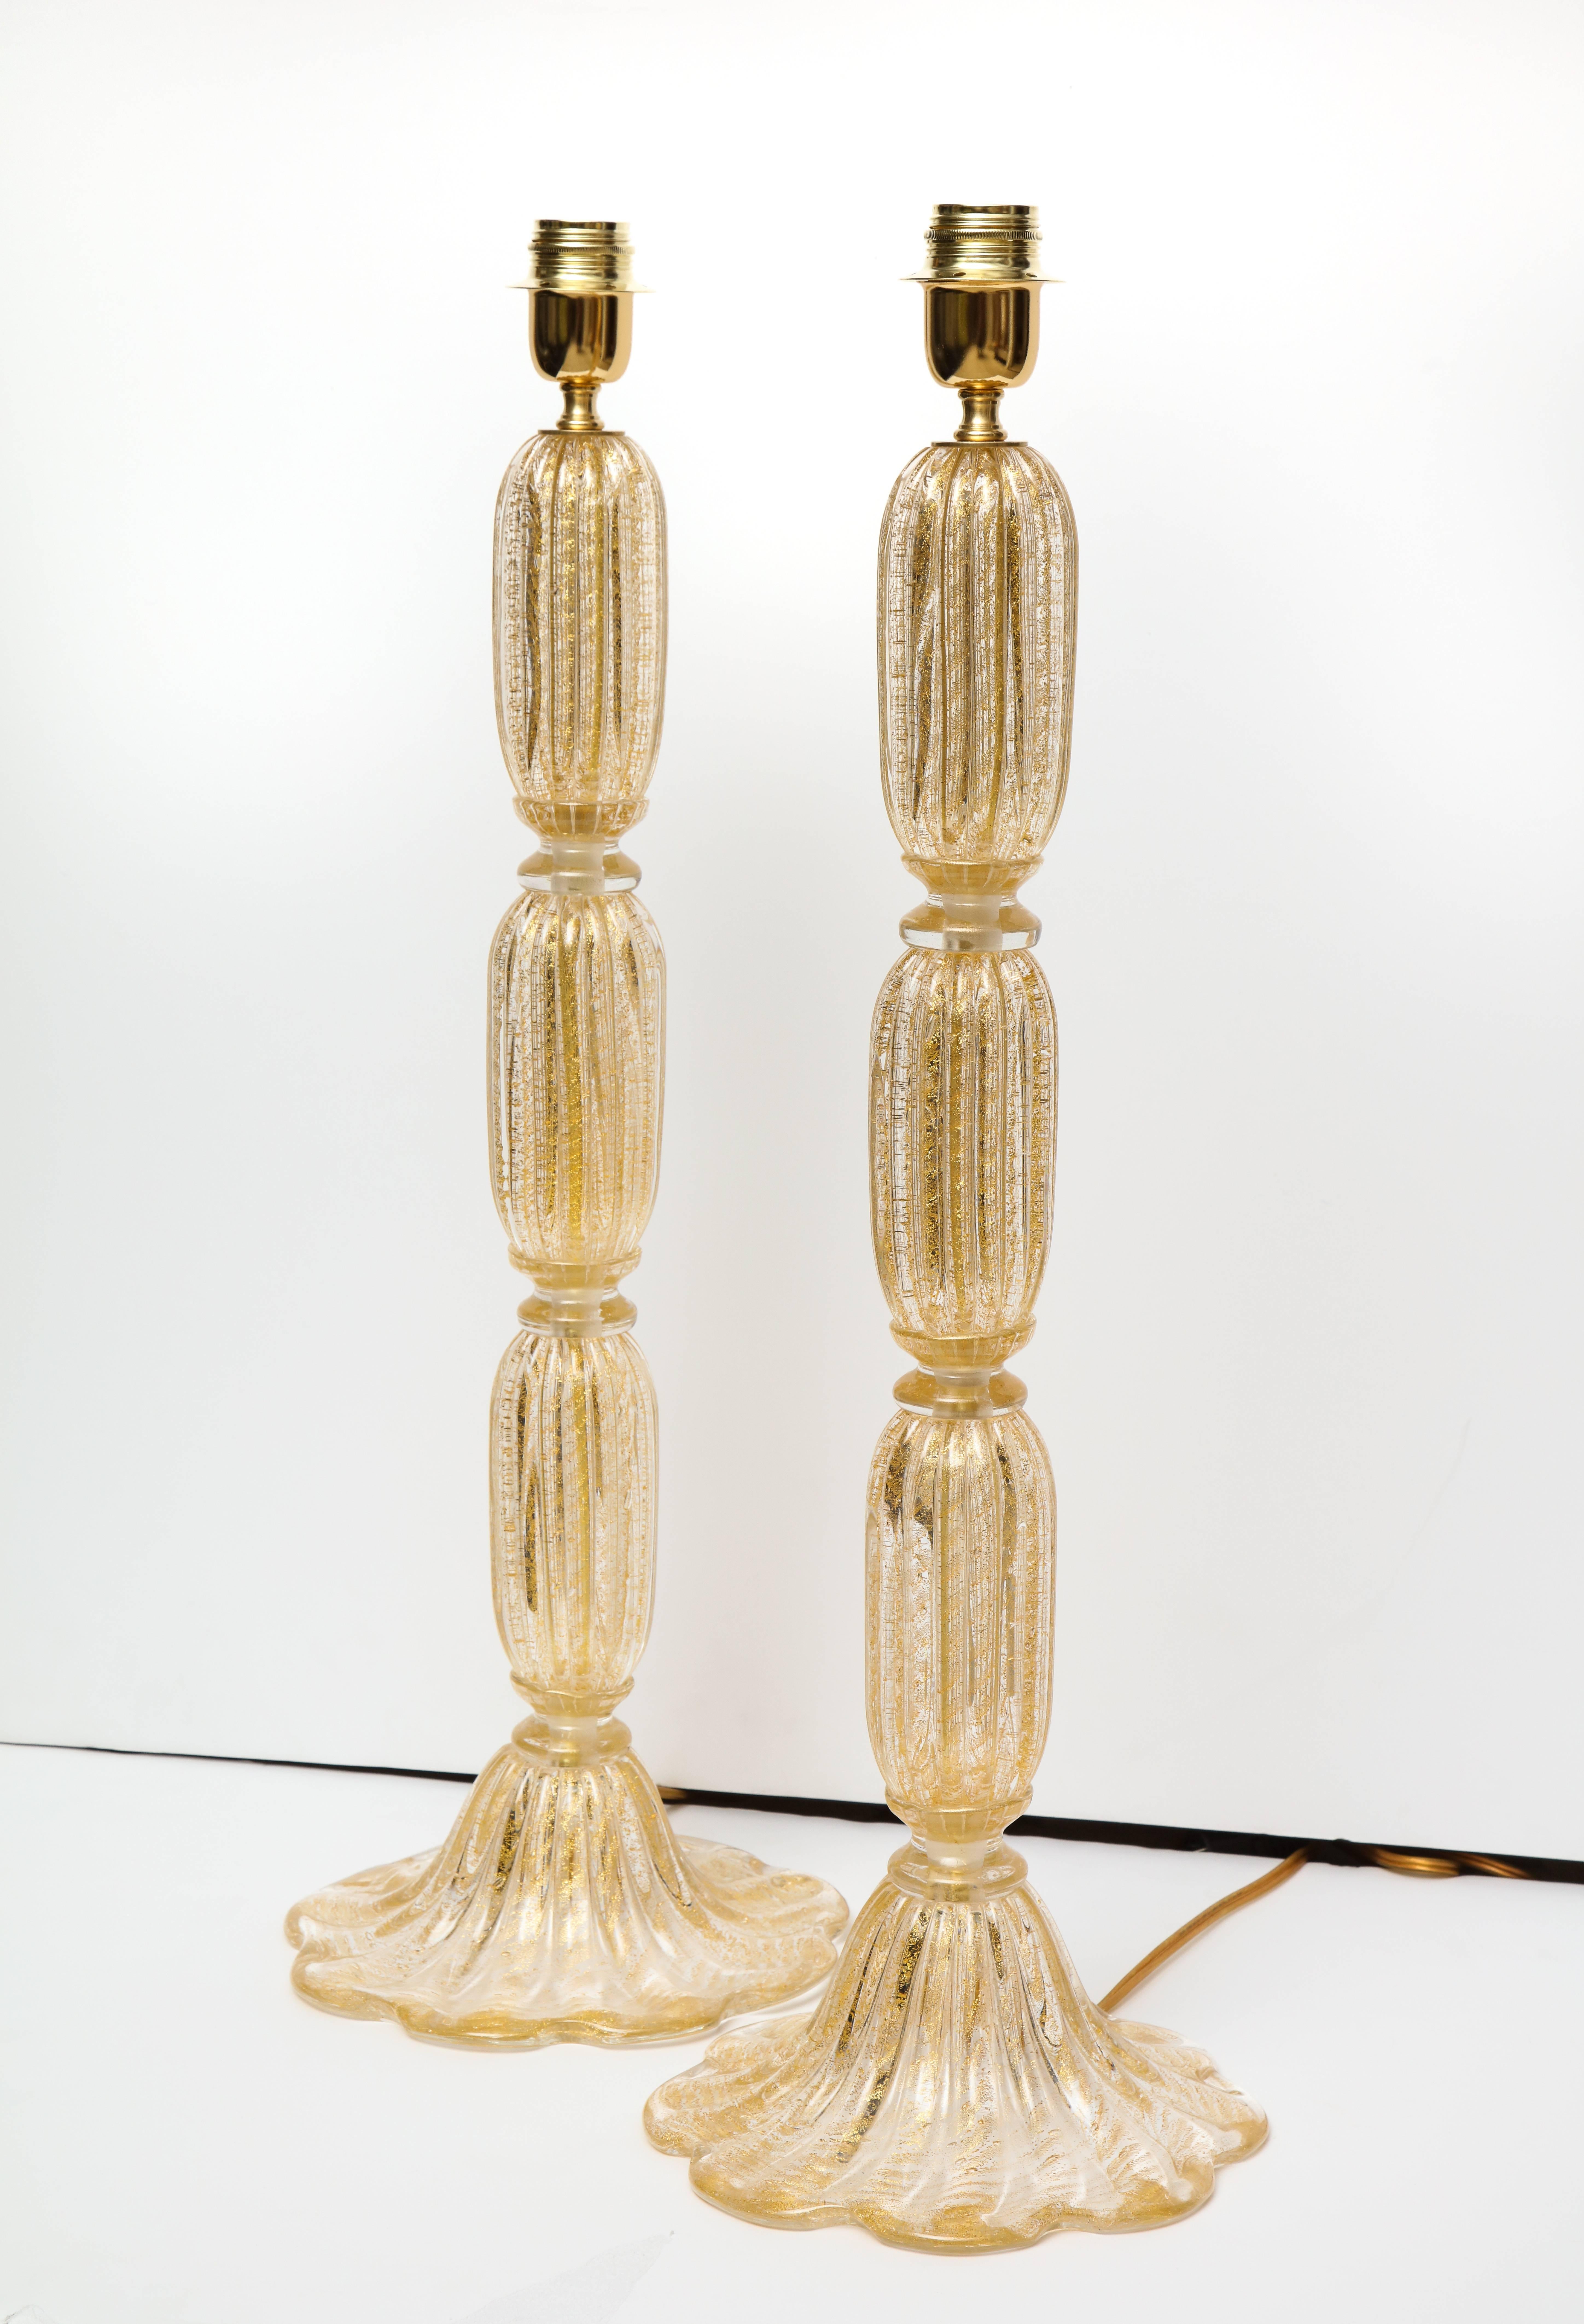 Hand-Crafted Tall Pair of Seguso Style 23-Karat Speckled Gold Murano Glass Lamps, Italy